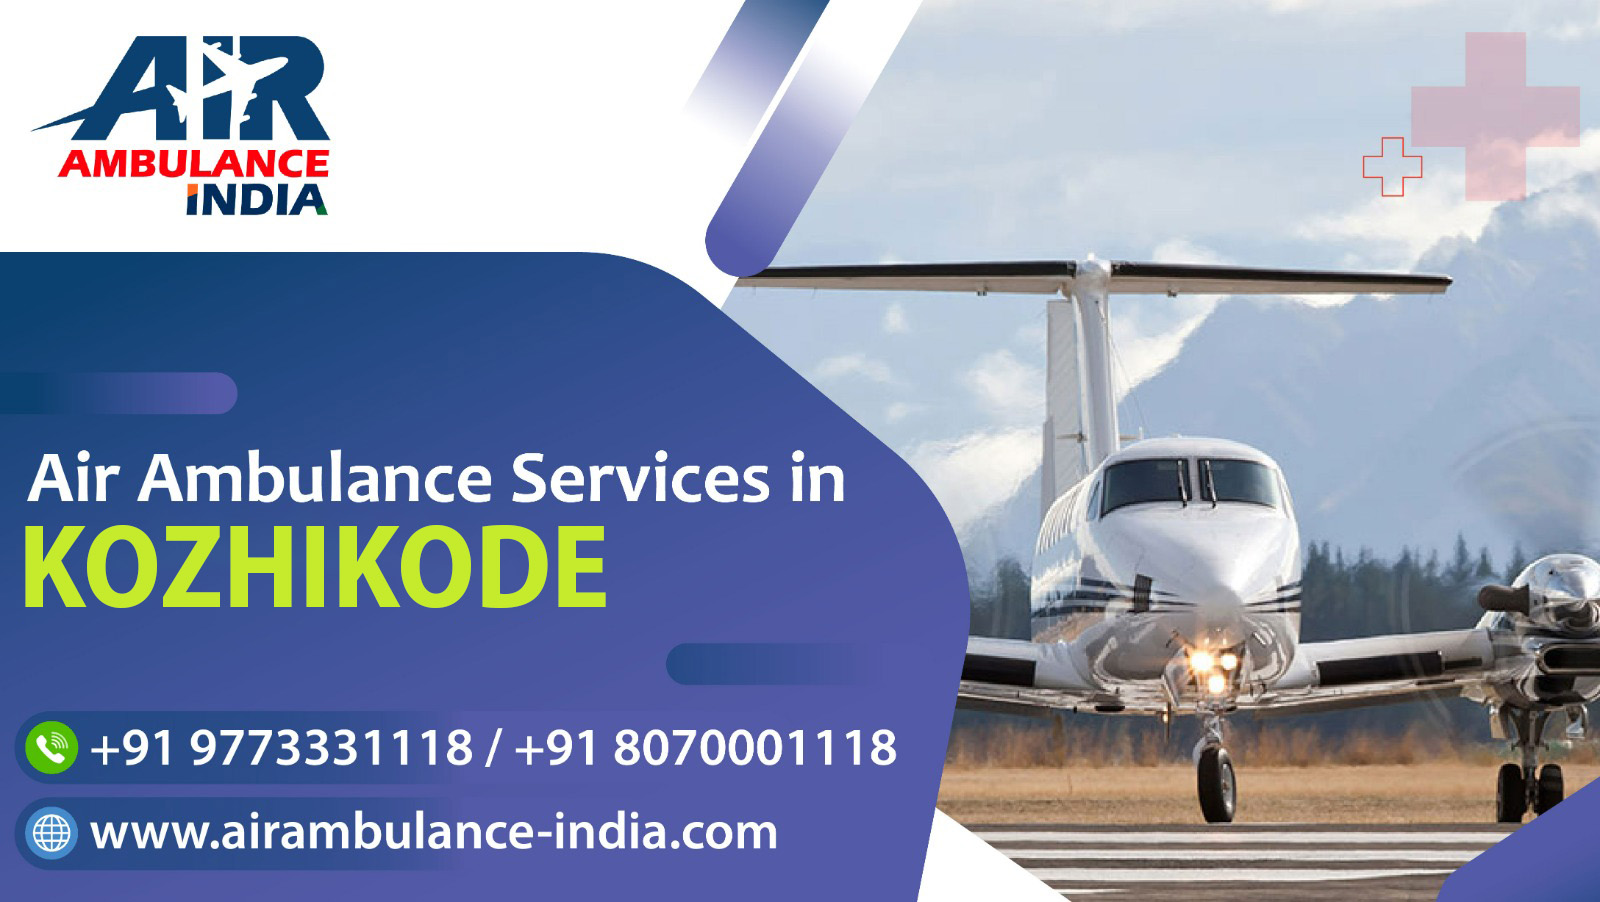 Air Ambulance Services in Kozhikode